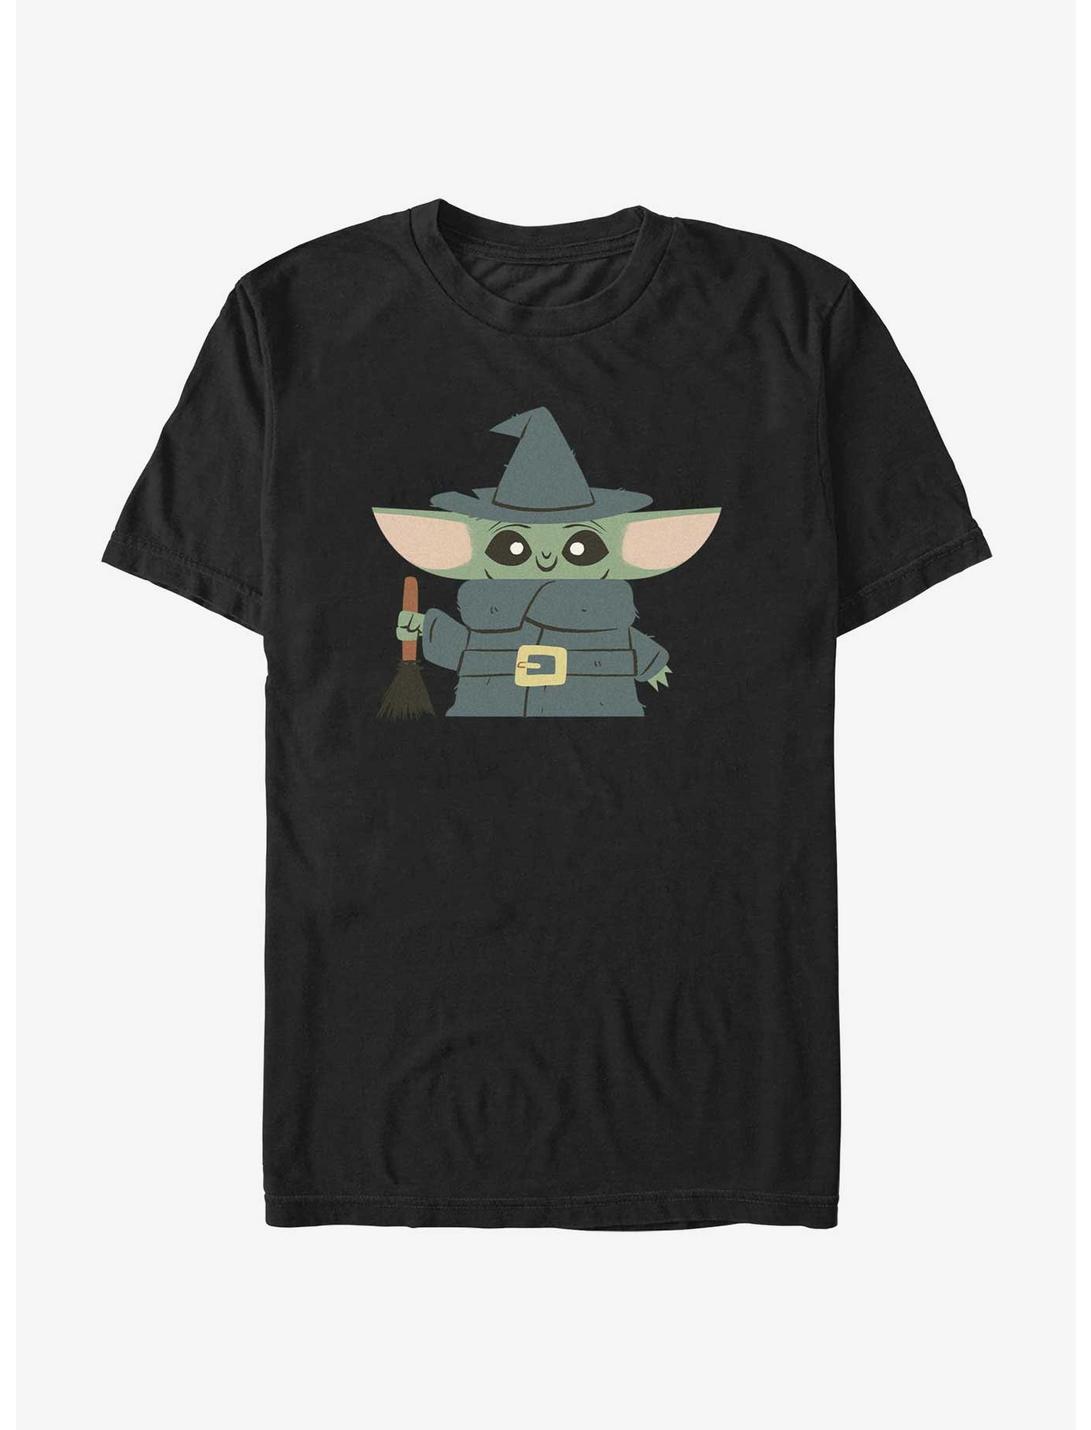 Star Wars The Mandalorian The Child Witch T-Shirt, BLACK, hi-res